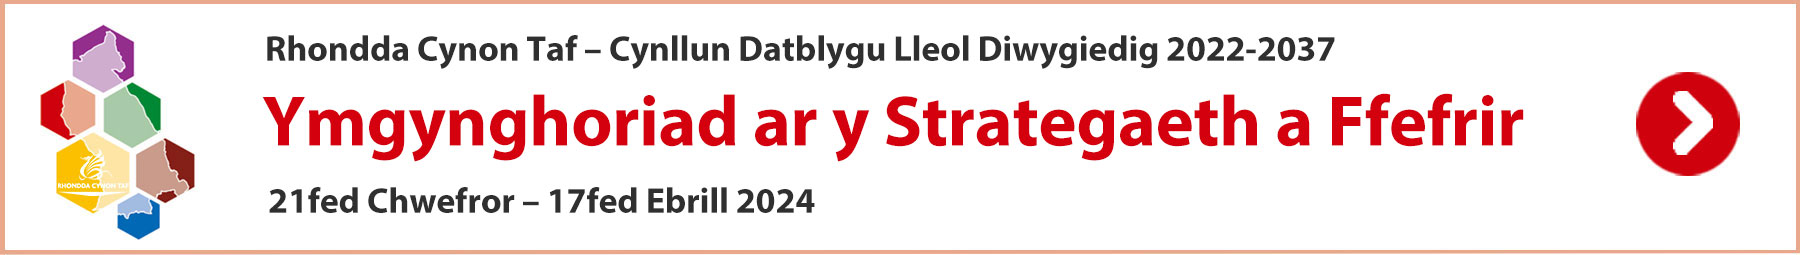 Consultation-of-the-preferred-Strategy